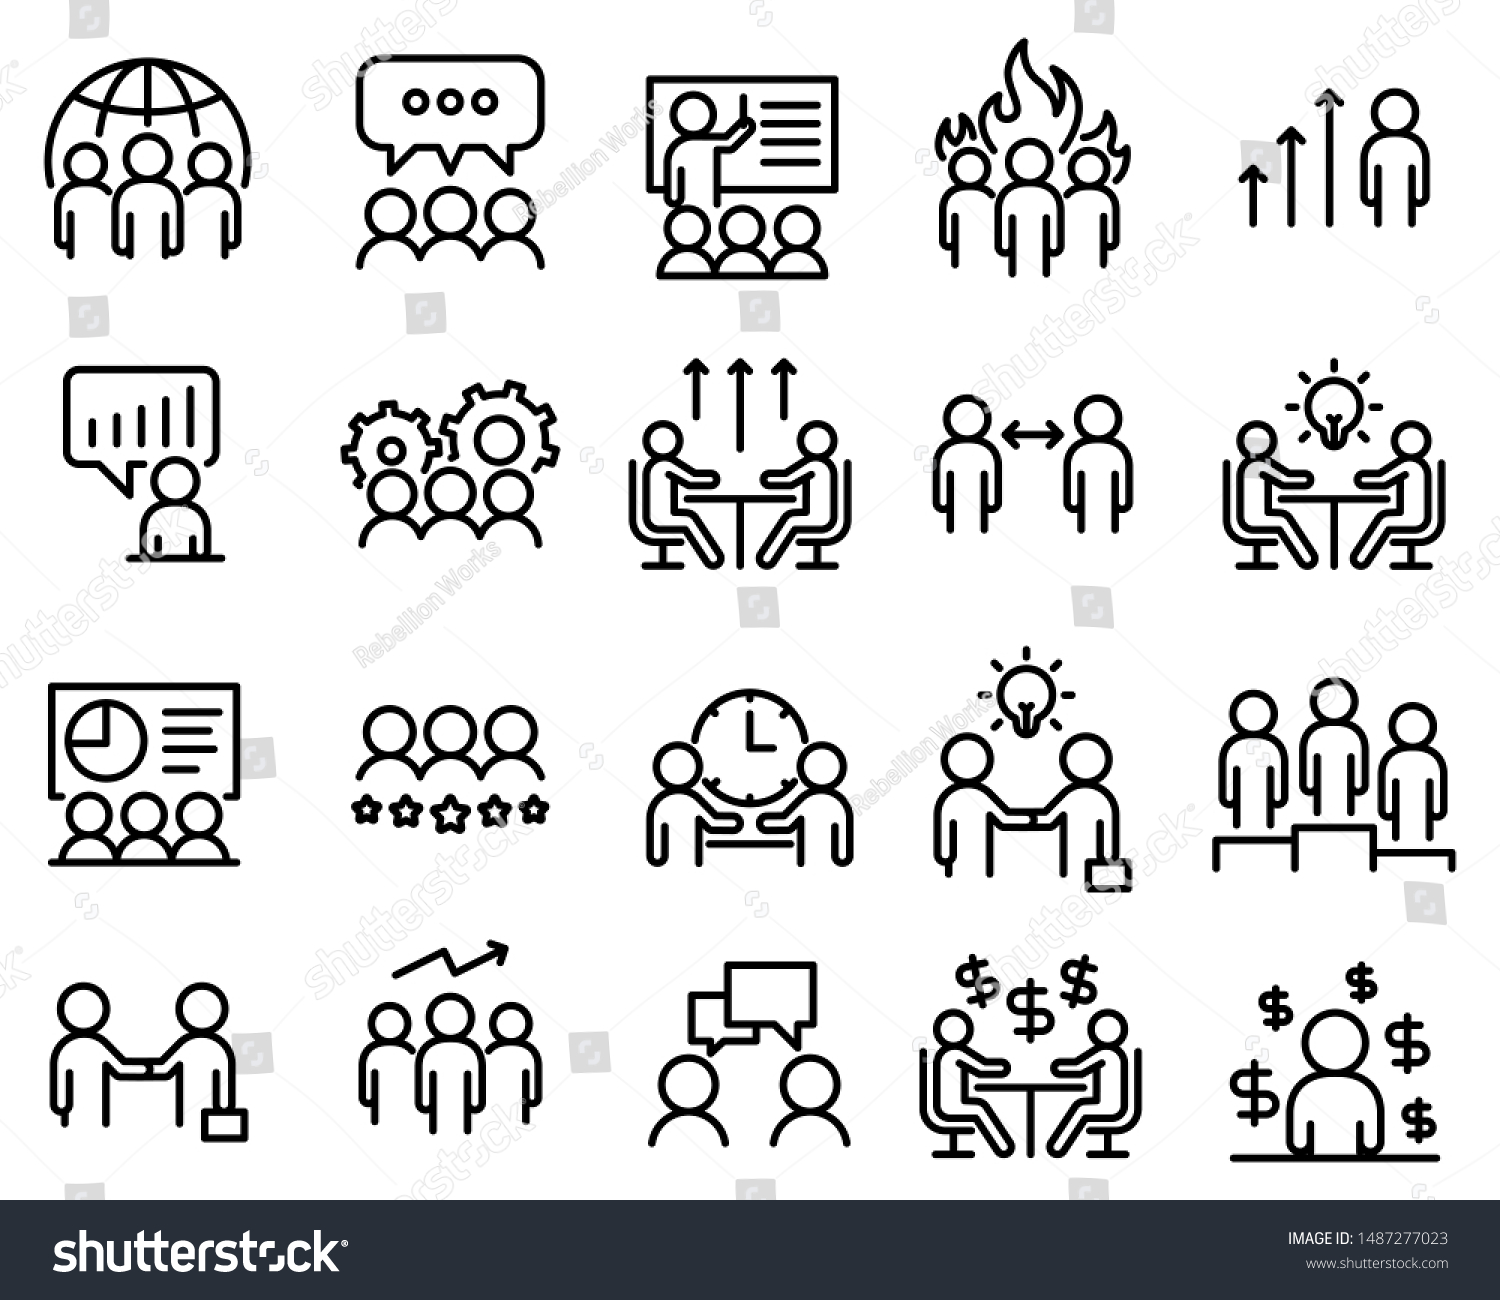 Set of meeting icons, such as seminar, classroom, team, conference, work, classroom #1487277023